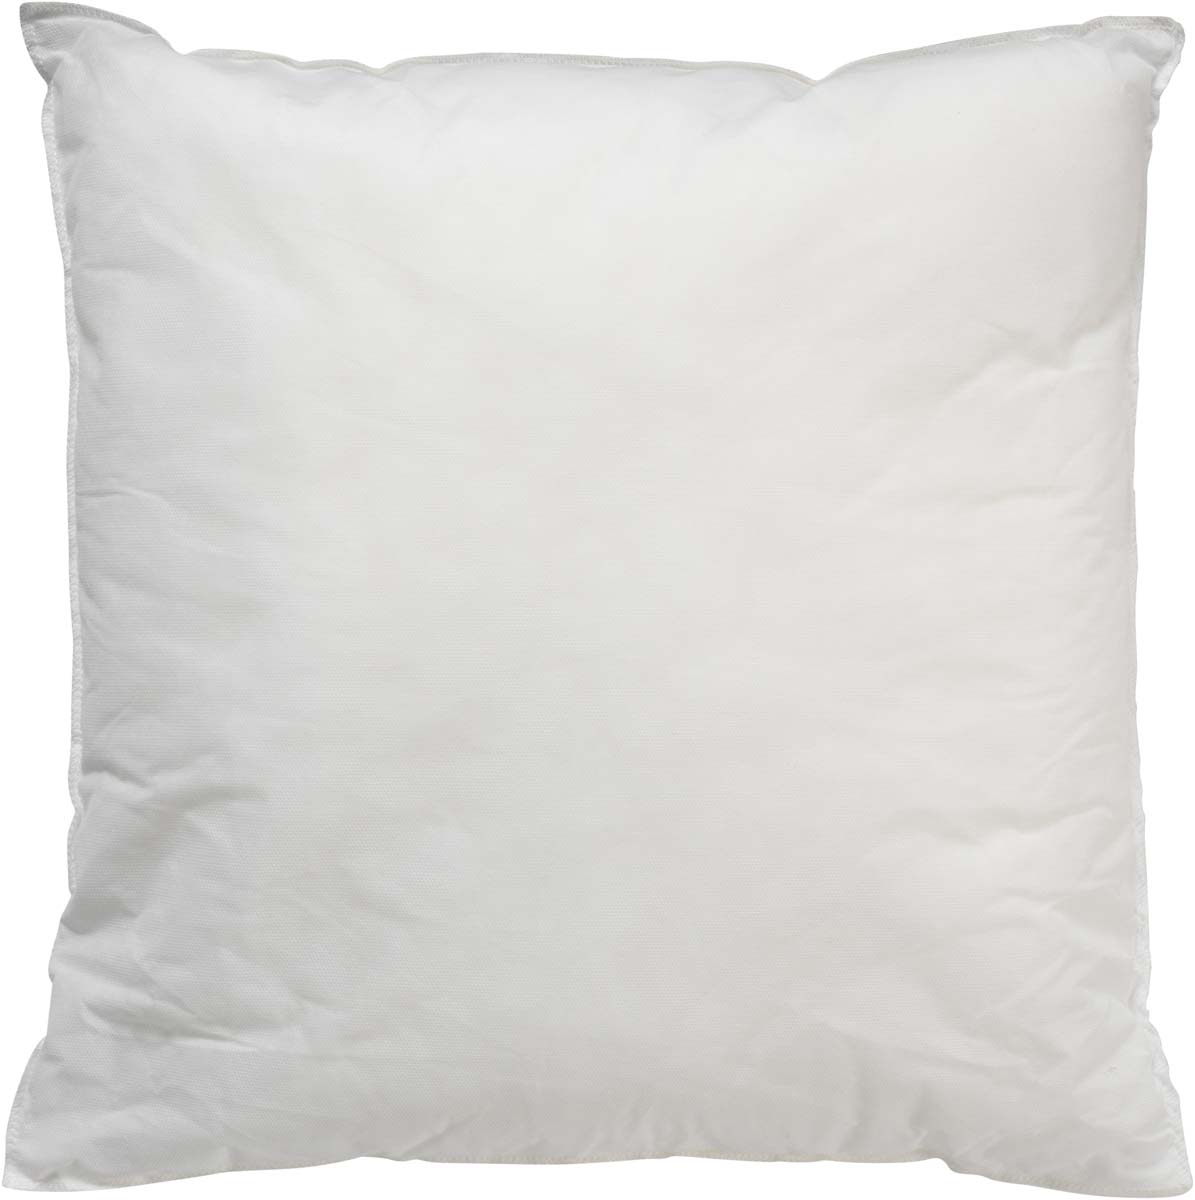 Inner cushion 70x70 cm With polyester filling